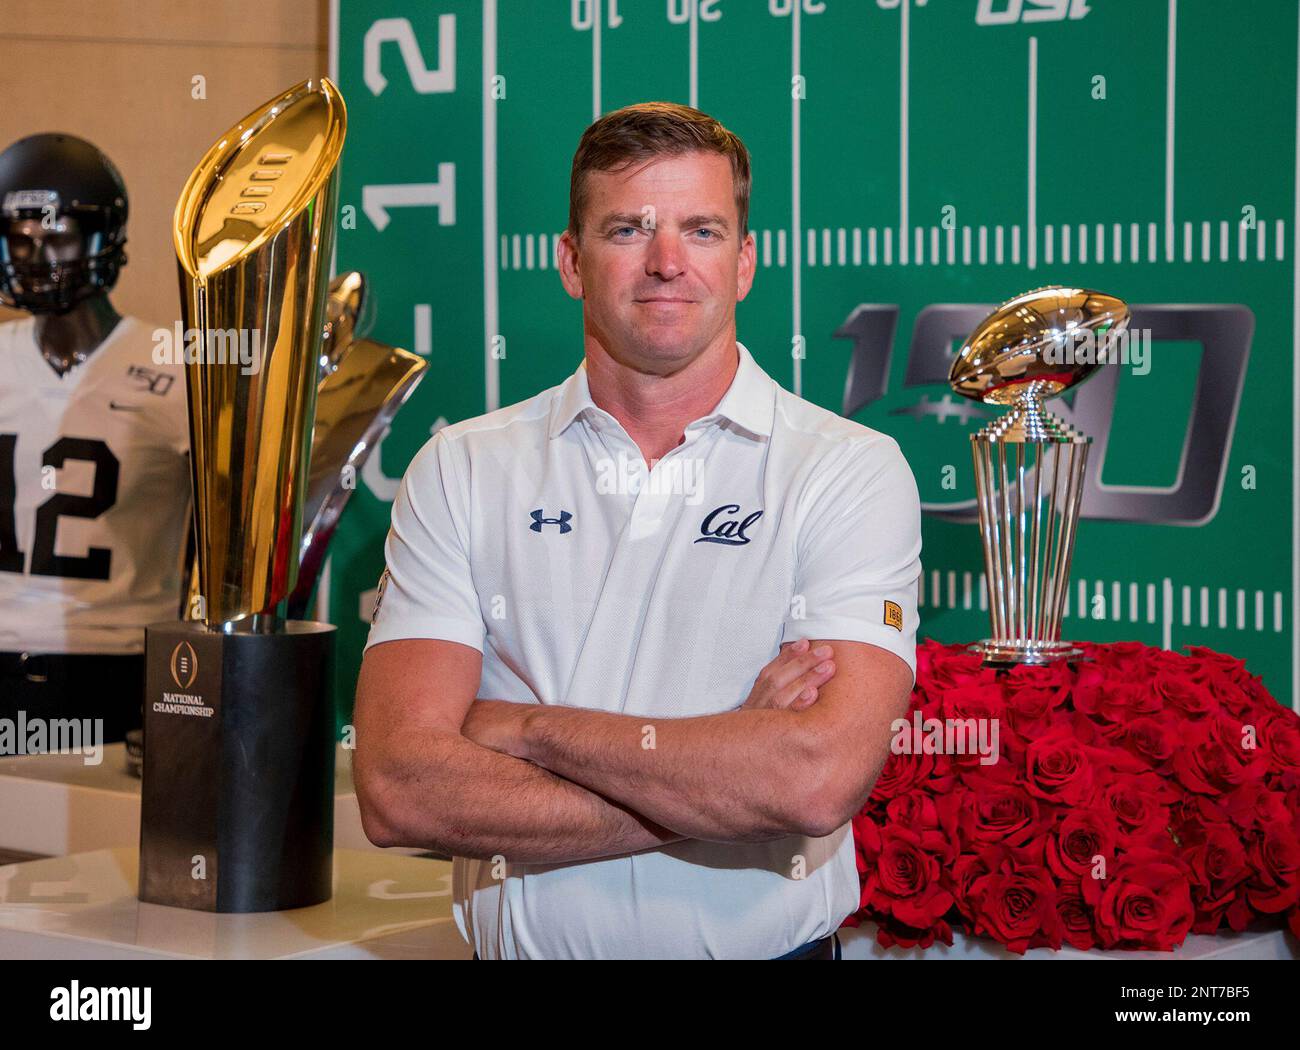 https://c8.alamy.com/comp/2NT7BF5/july-24-2019-hollywood-cacal-bears-head-coach-justin-wilcox-poses-for-a-photo-in-front-of-the-rose-bowl-and-national-championship-trophies-at-the-pac-12-football-media-day-on-wednesday-july-24-2019-at-the-hollywood-and-highland-in-hollywood-ca-mandatory-credit-juan-lainez-marinmediaorg-cal-sport-media-complete-photographer-and-credit-requiredcredit-image-juan-lainez-marinmediaorg-ccsm-via-zuma-wire-cal-sport-media-via-ap-images-2NT7BF5.jpg